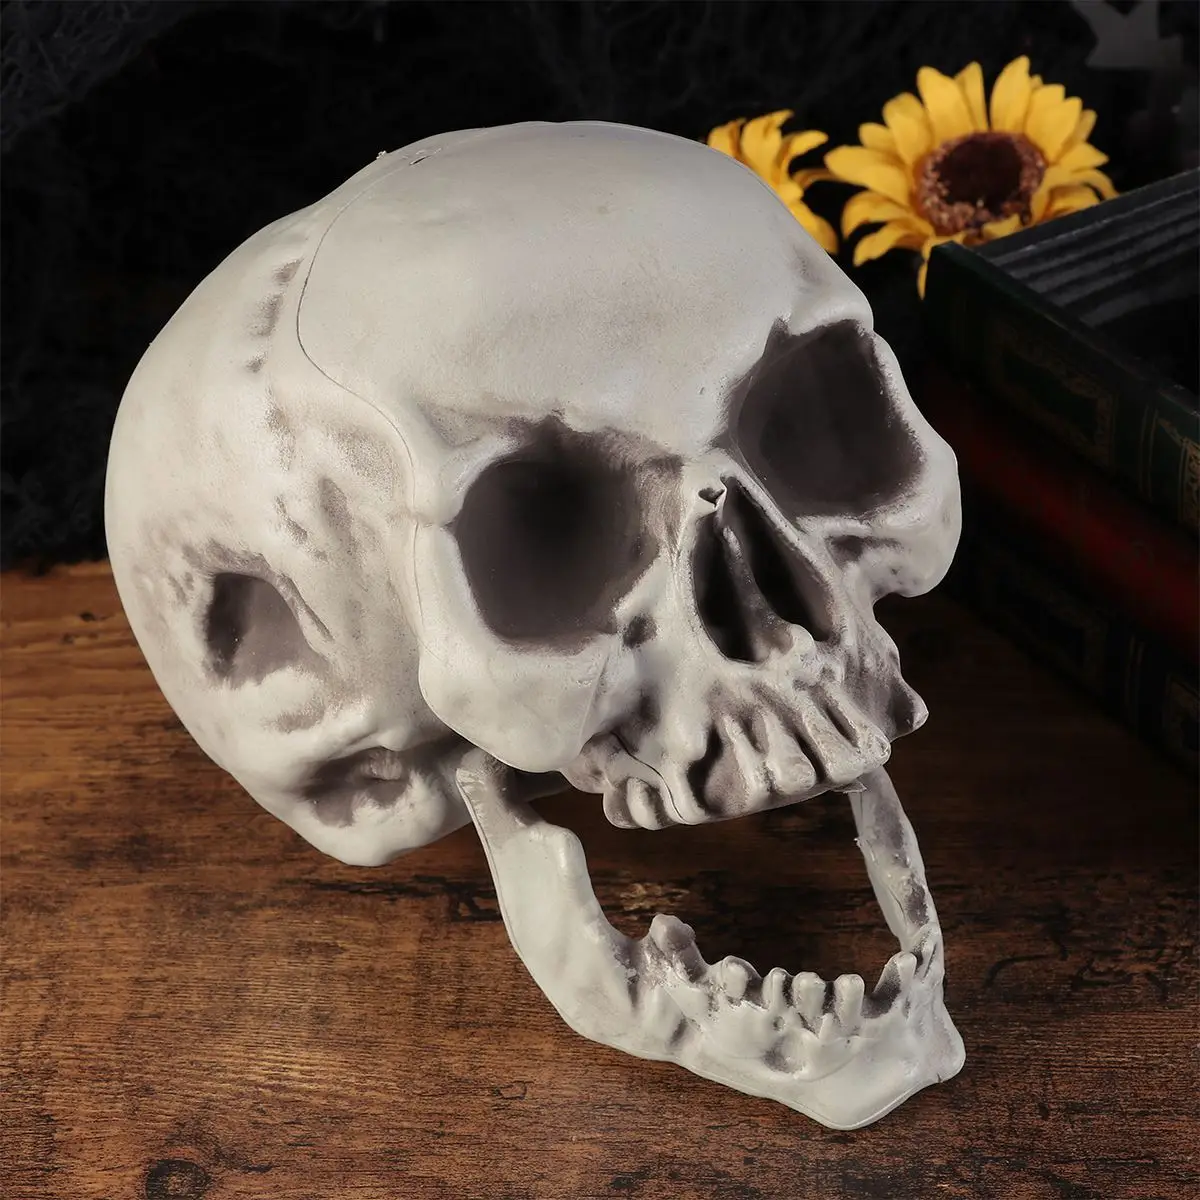 

Halloween Decorations Artificial Skull Scared Skull Ornament Ghost House Props Skull Bone Scary Horror Skeleton Party Ornament